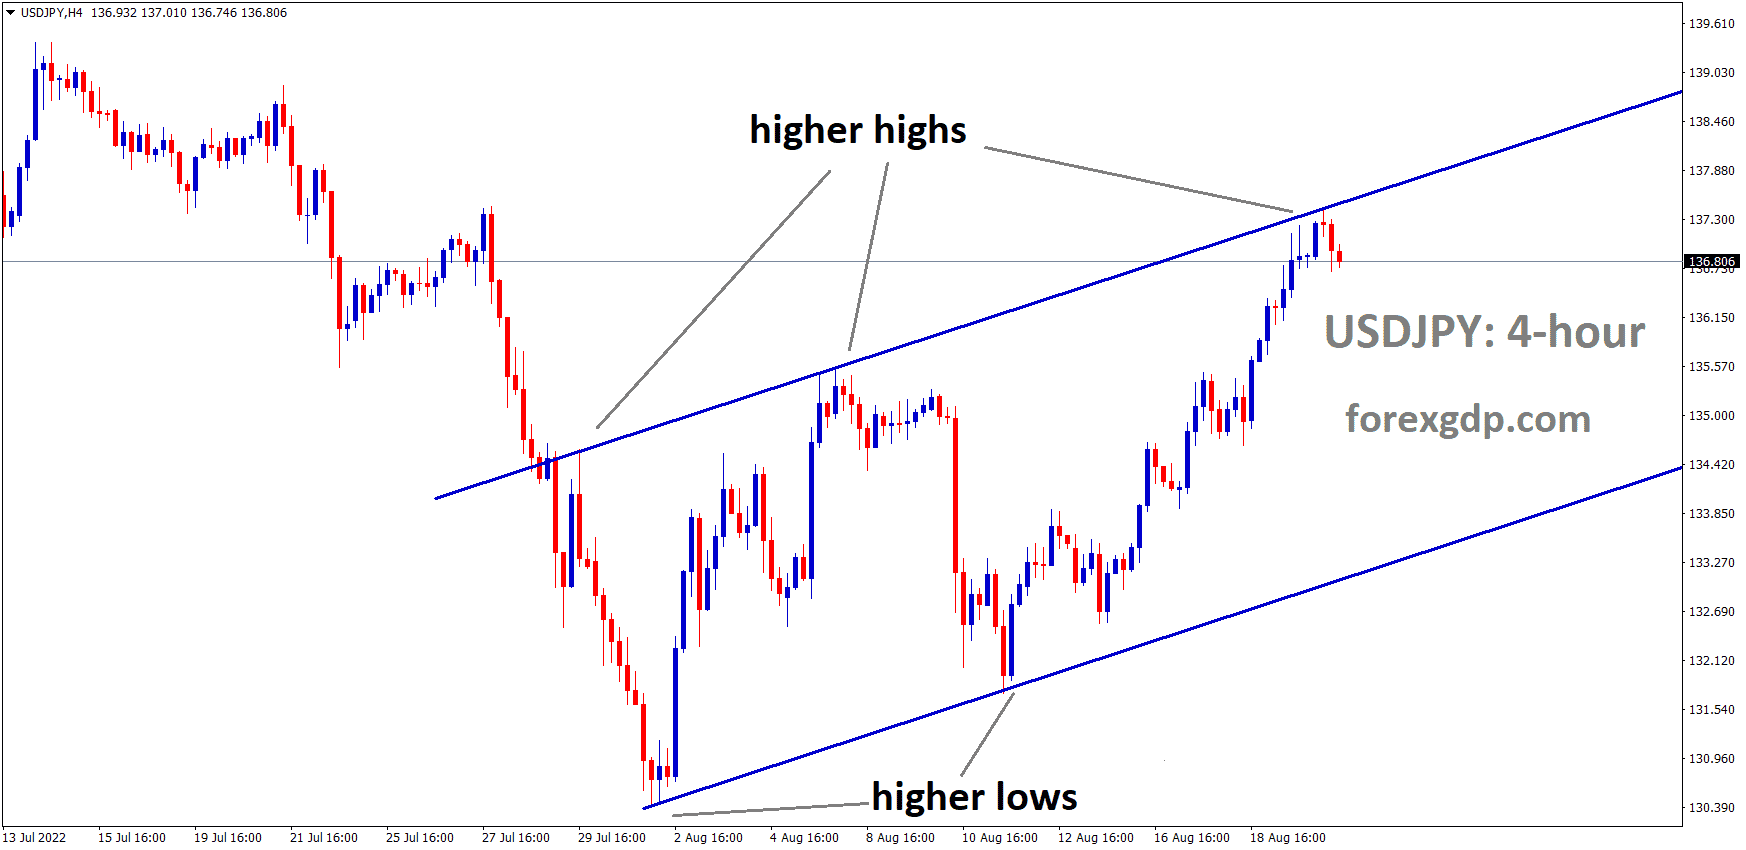 USDJPY is moving in an Ascending channel and the Market has fallen from the higher high area of the channel